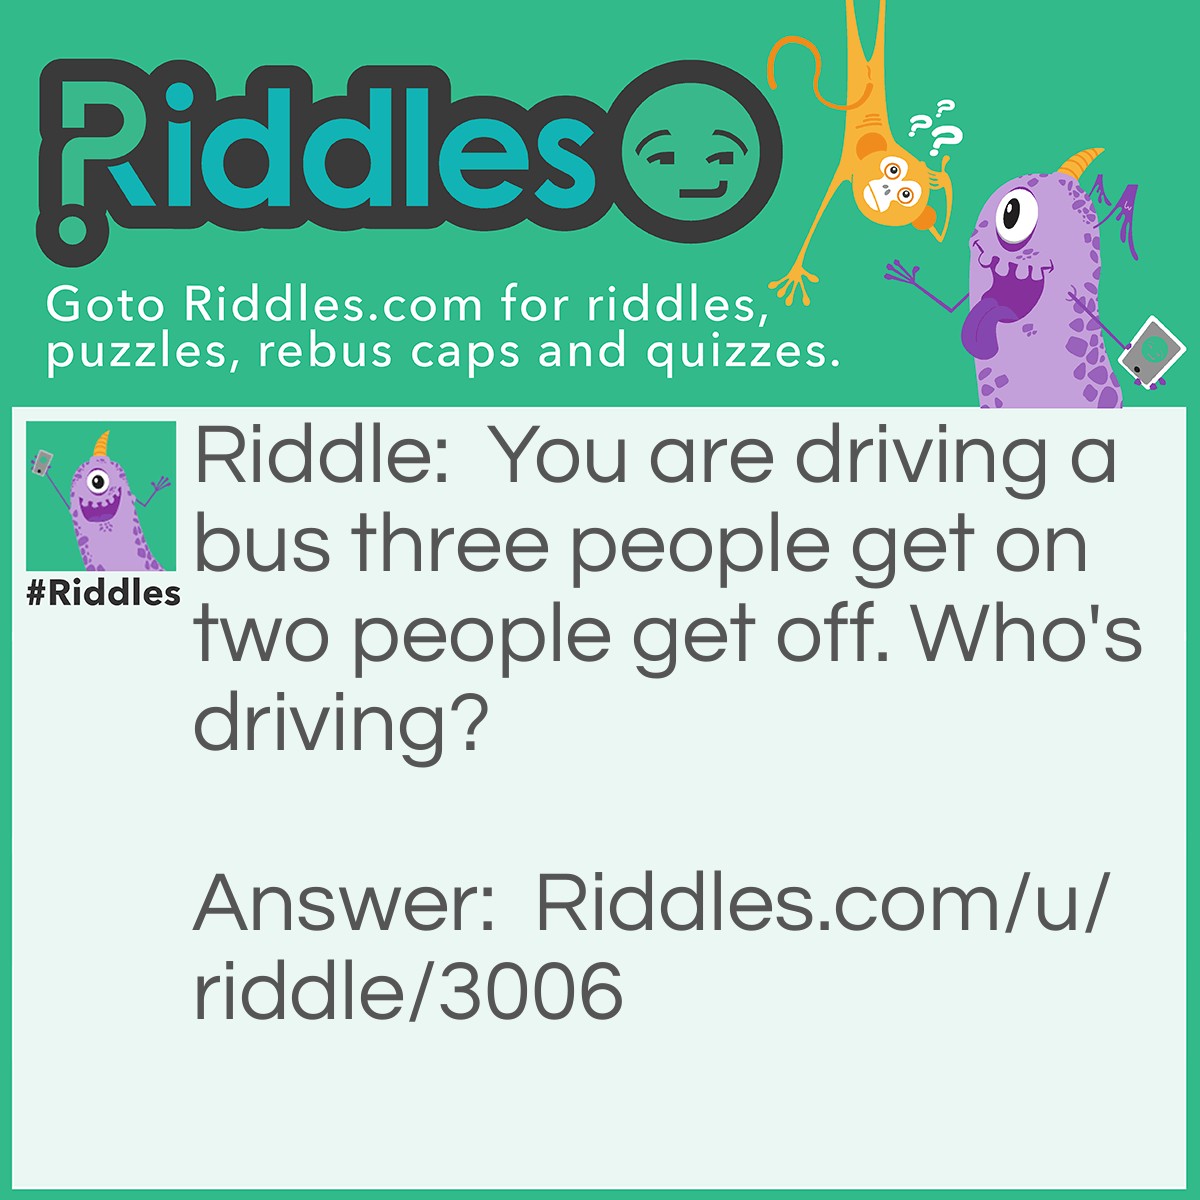 Riddle: You are driving a bus three people get on two people get off. Who's driving? Answer: You are.